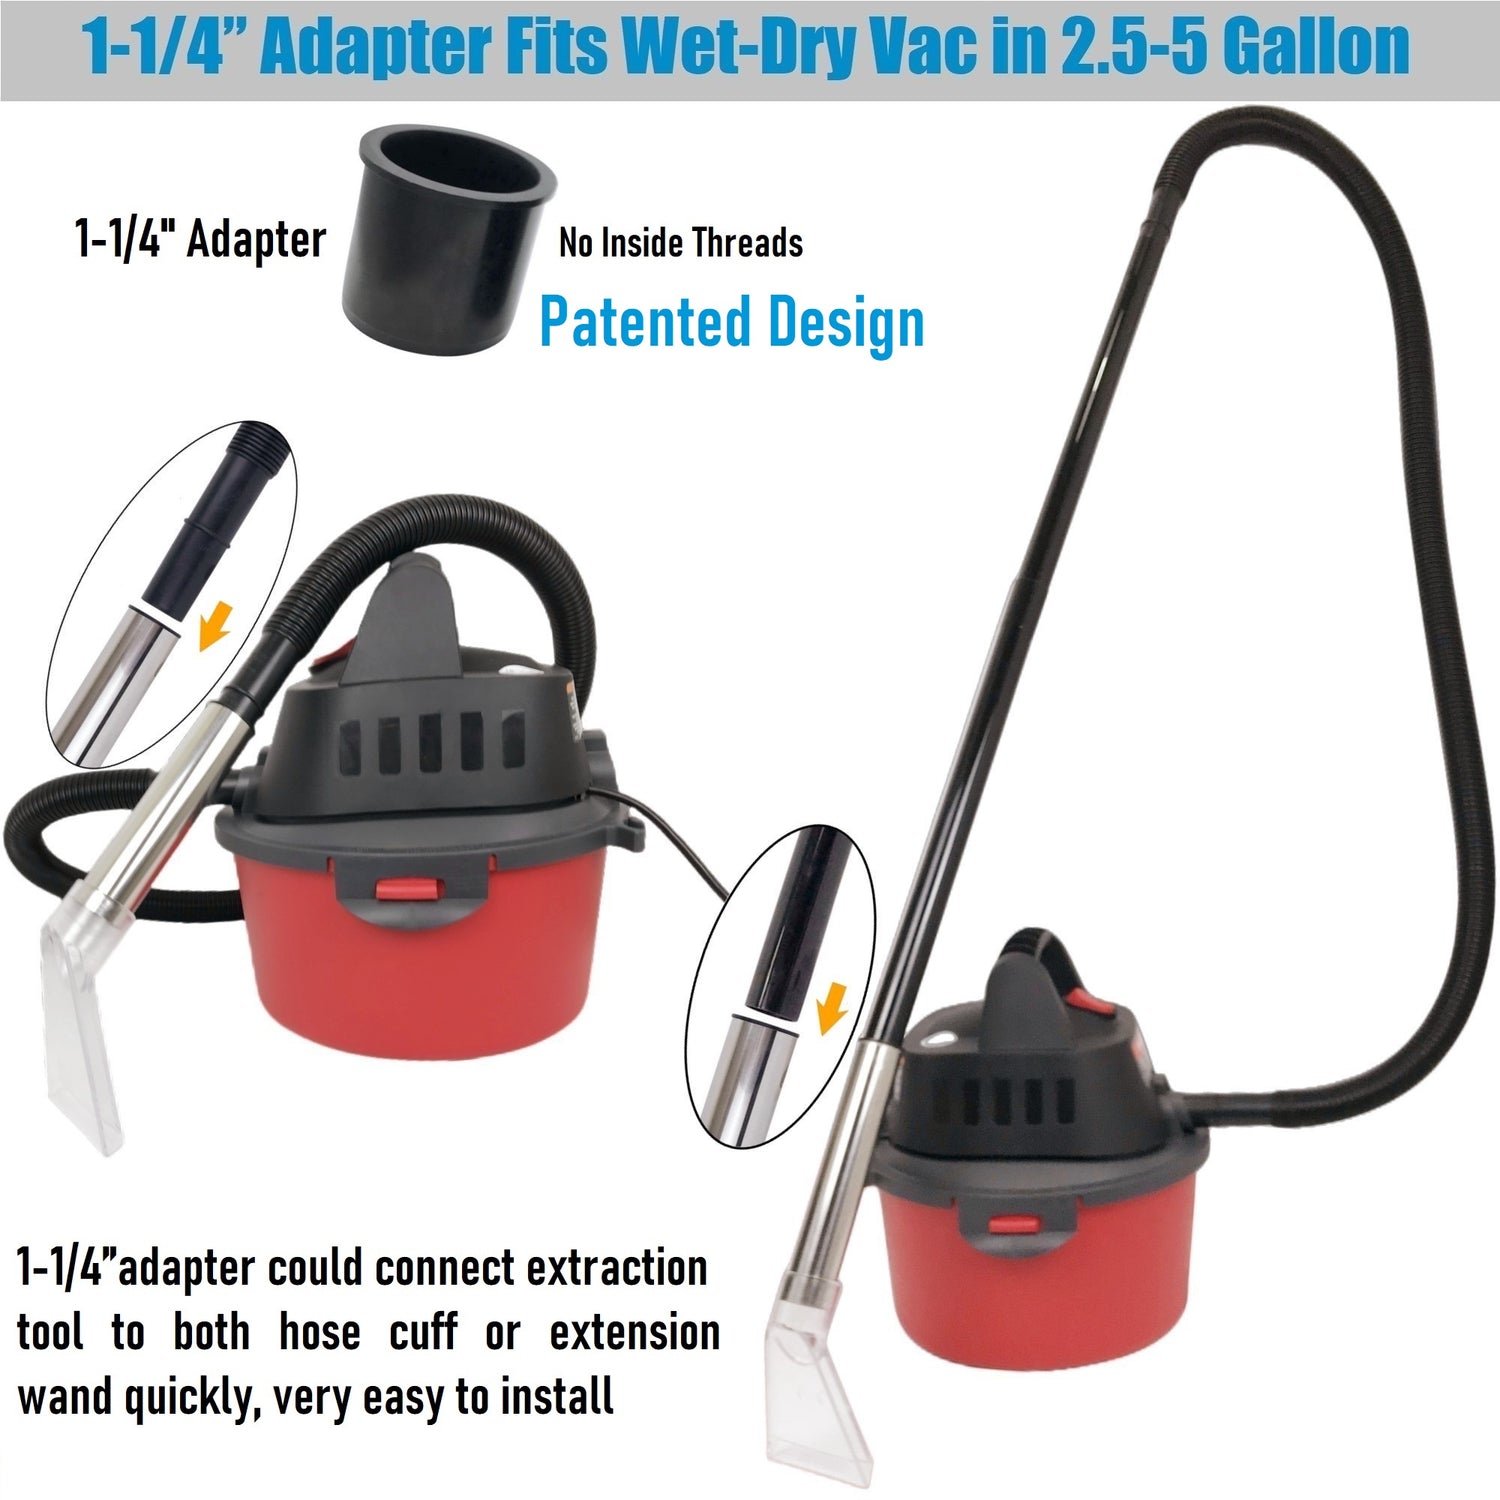 Happy Tree Shop VAC Extractor Attachment,Turn Wet-Dry VAC Into An Extractor, Detailing Wand Extractor Vacuum Cleaner